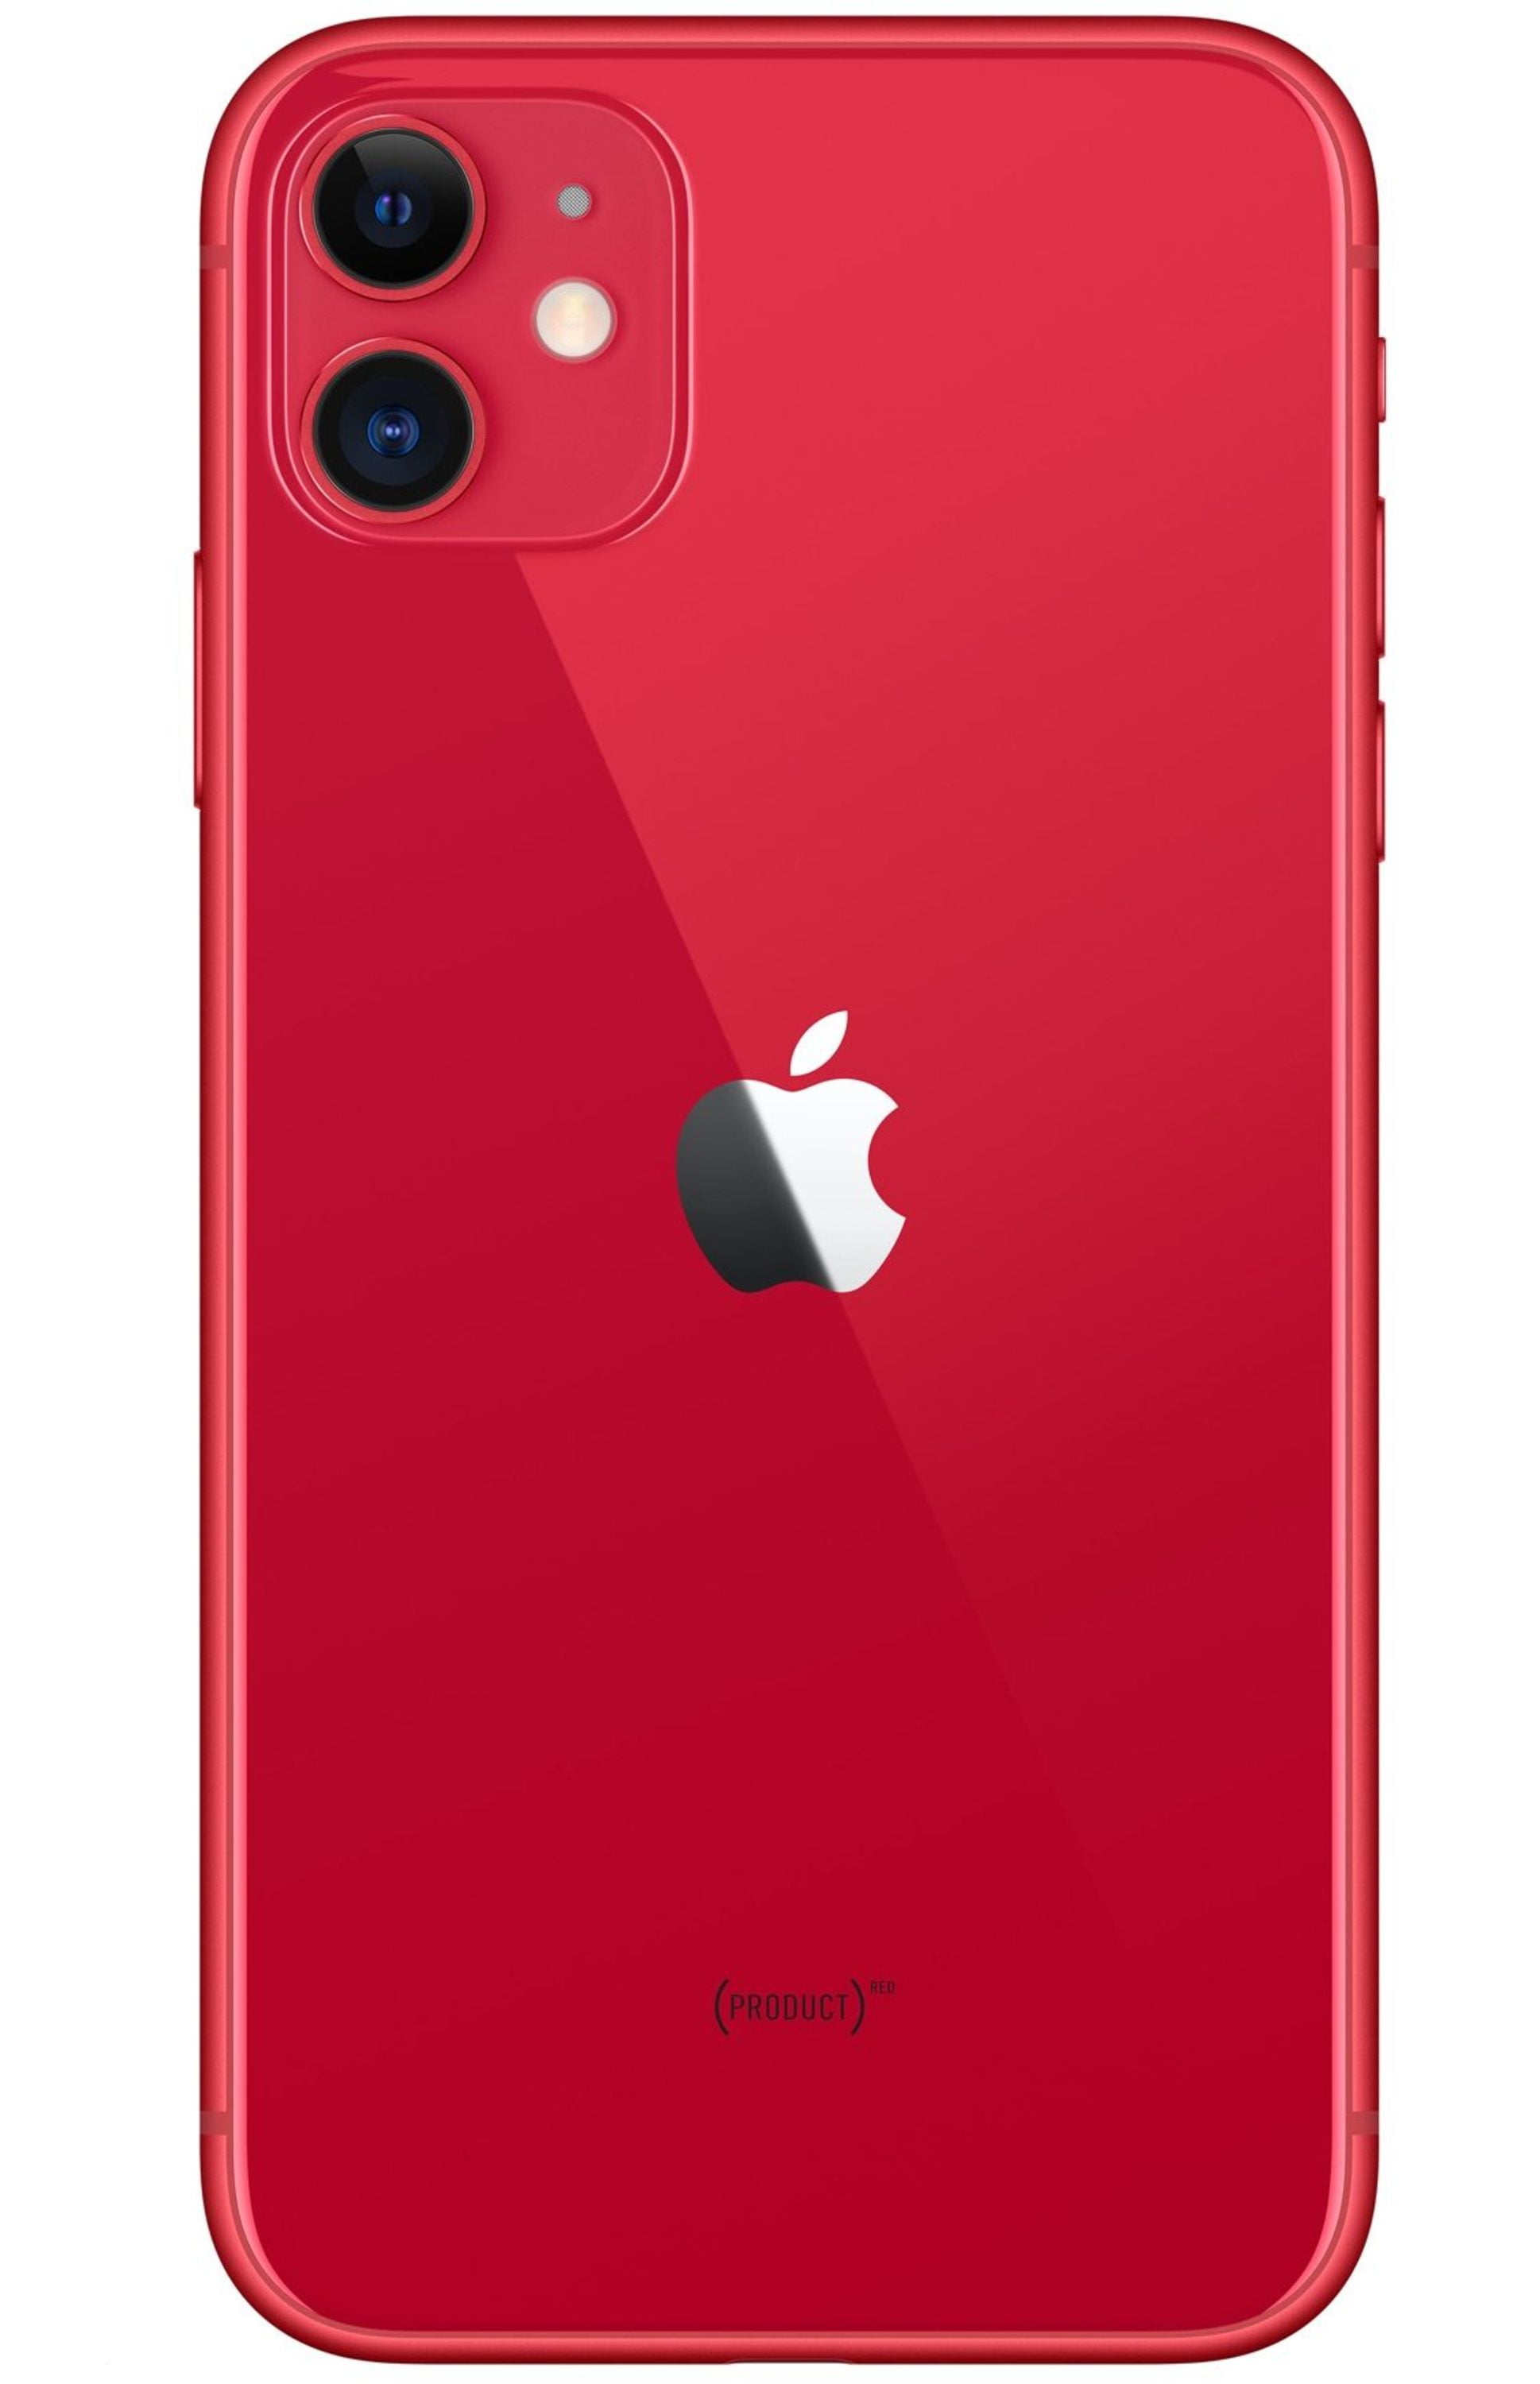 iPhone 11 128GB Product Red Sim Free-